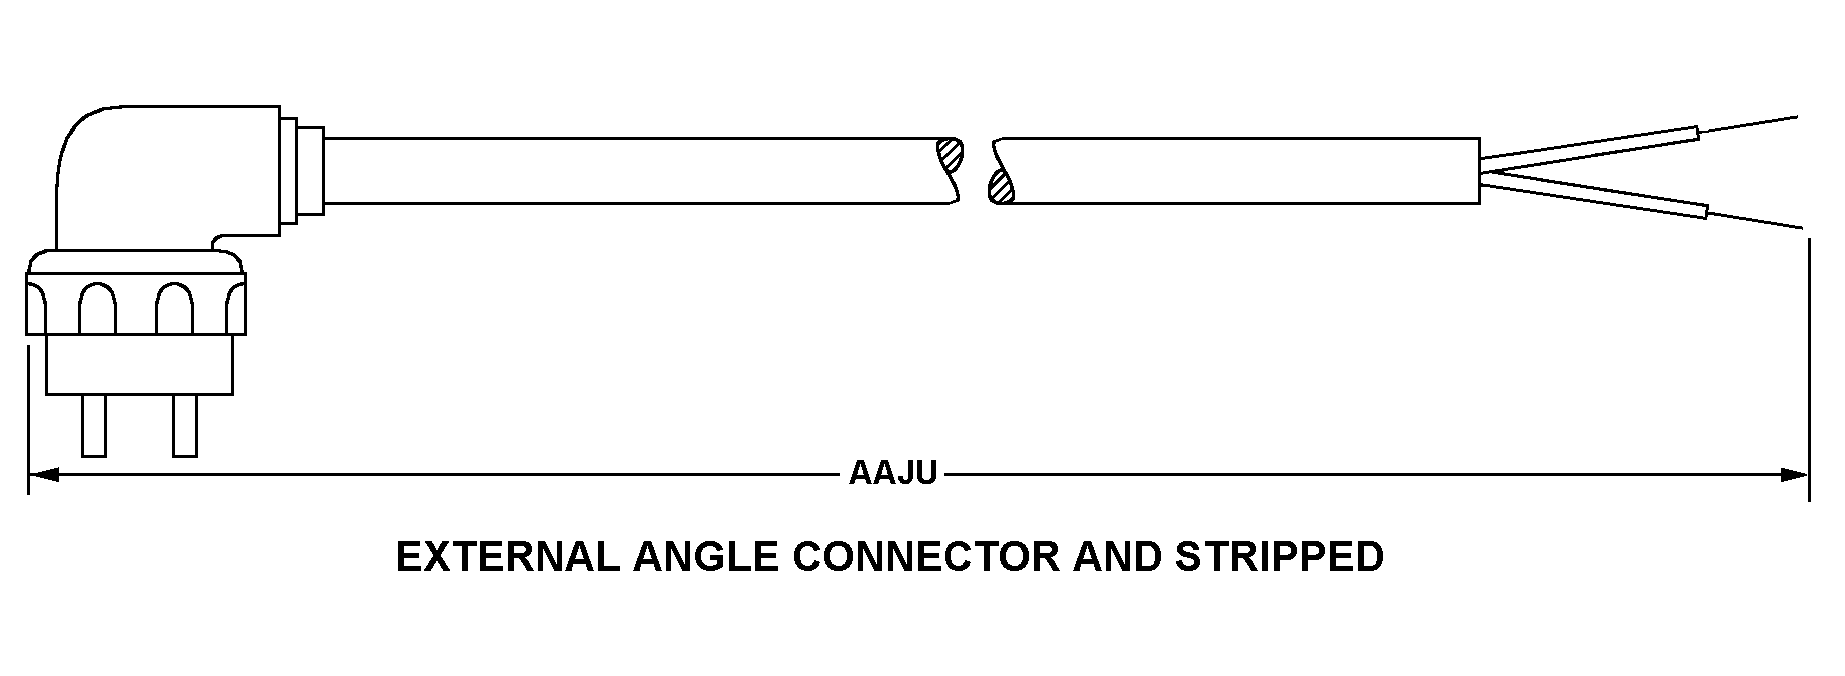 EXTERNAL ANGLE CONNECTOR AND STRIPPED style nsn 5995-01-416-1738